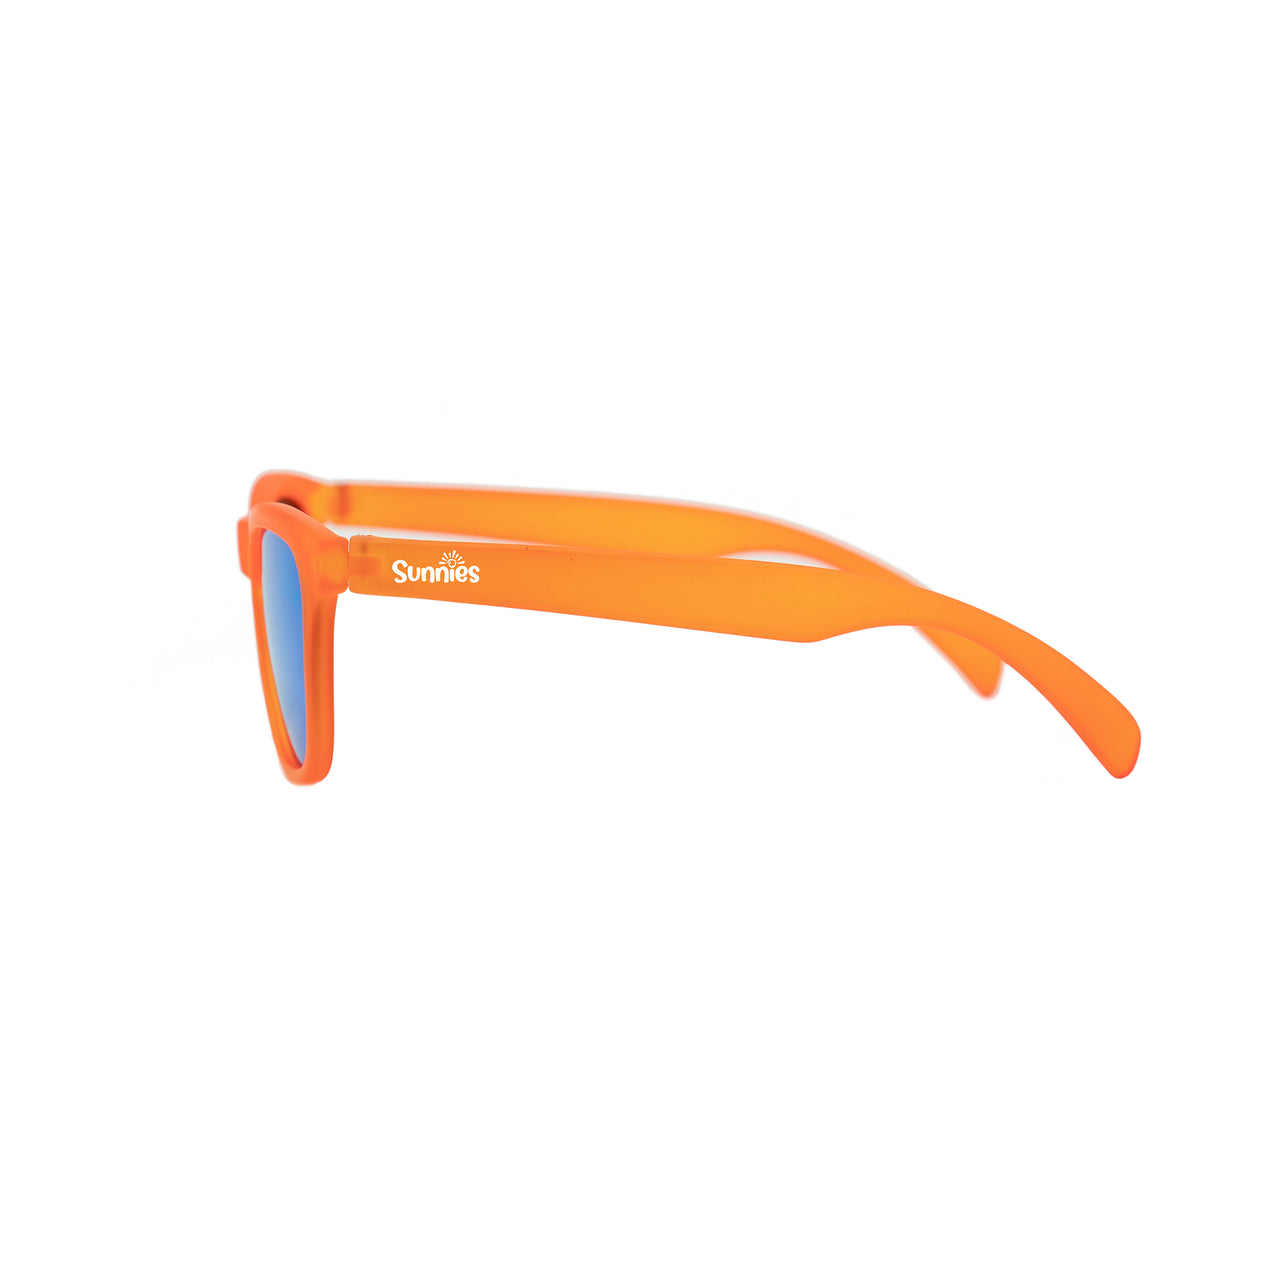 Side view of Sunnies polarized kids sunglasses with a transparent orange frame and reflective blue lenses.